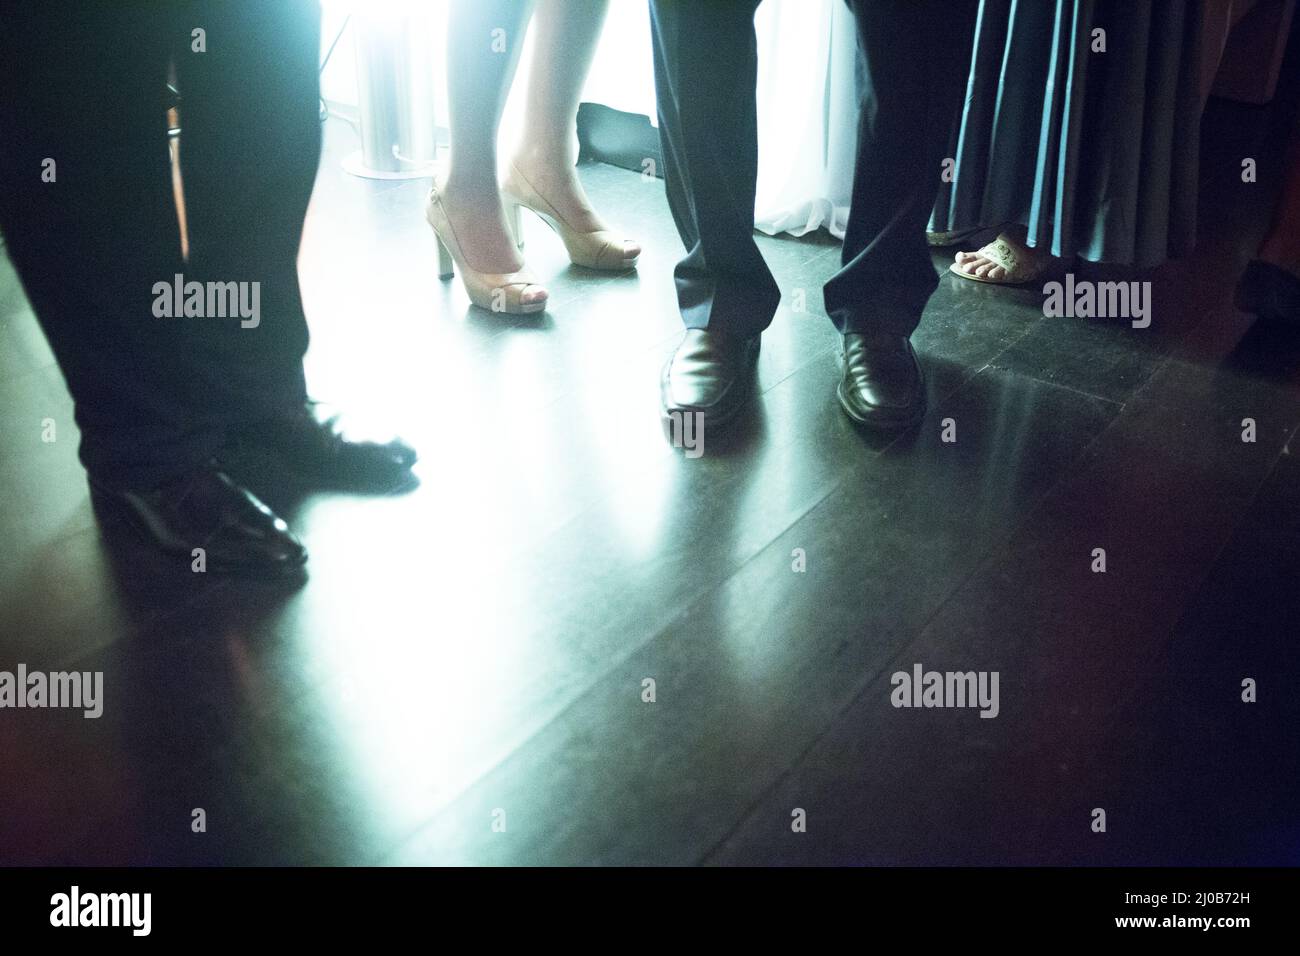 Legs of men and young lady social event wedding party Stock Photo